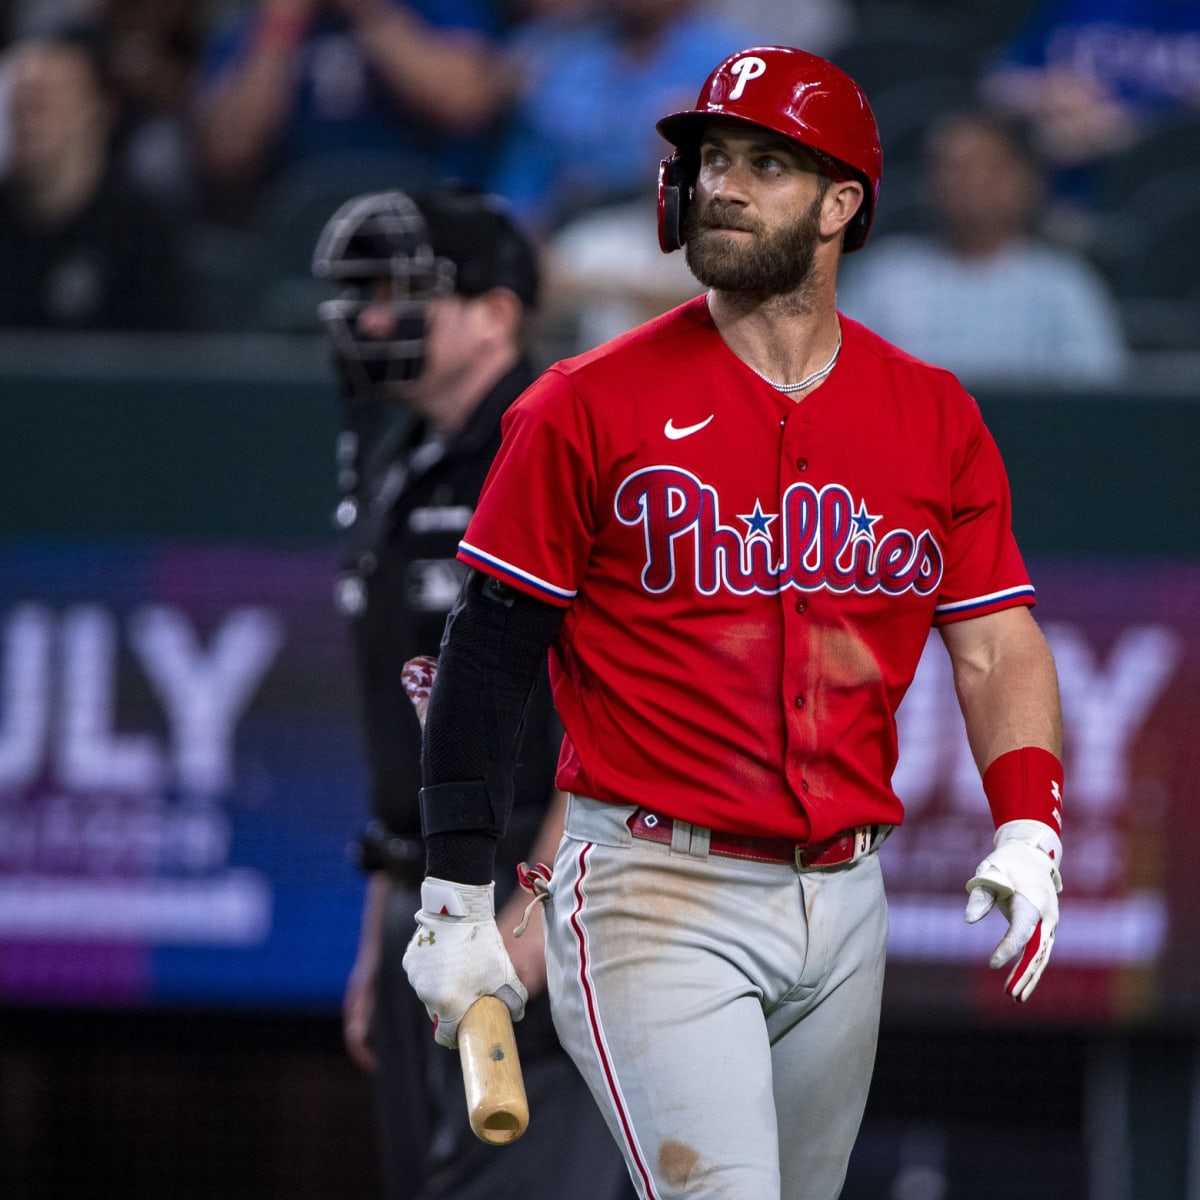 Harper 0-for-4 in return to lineup, Phillies lose big to Dodgers